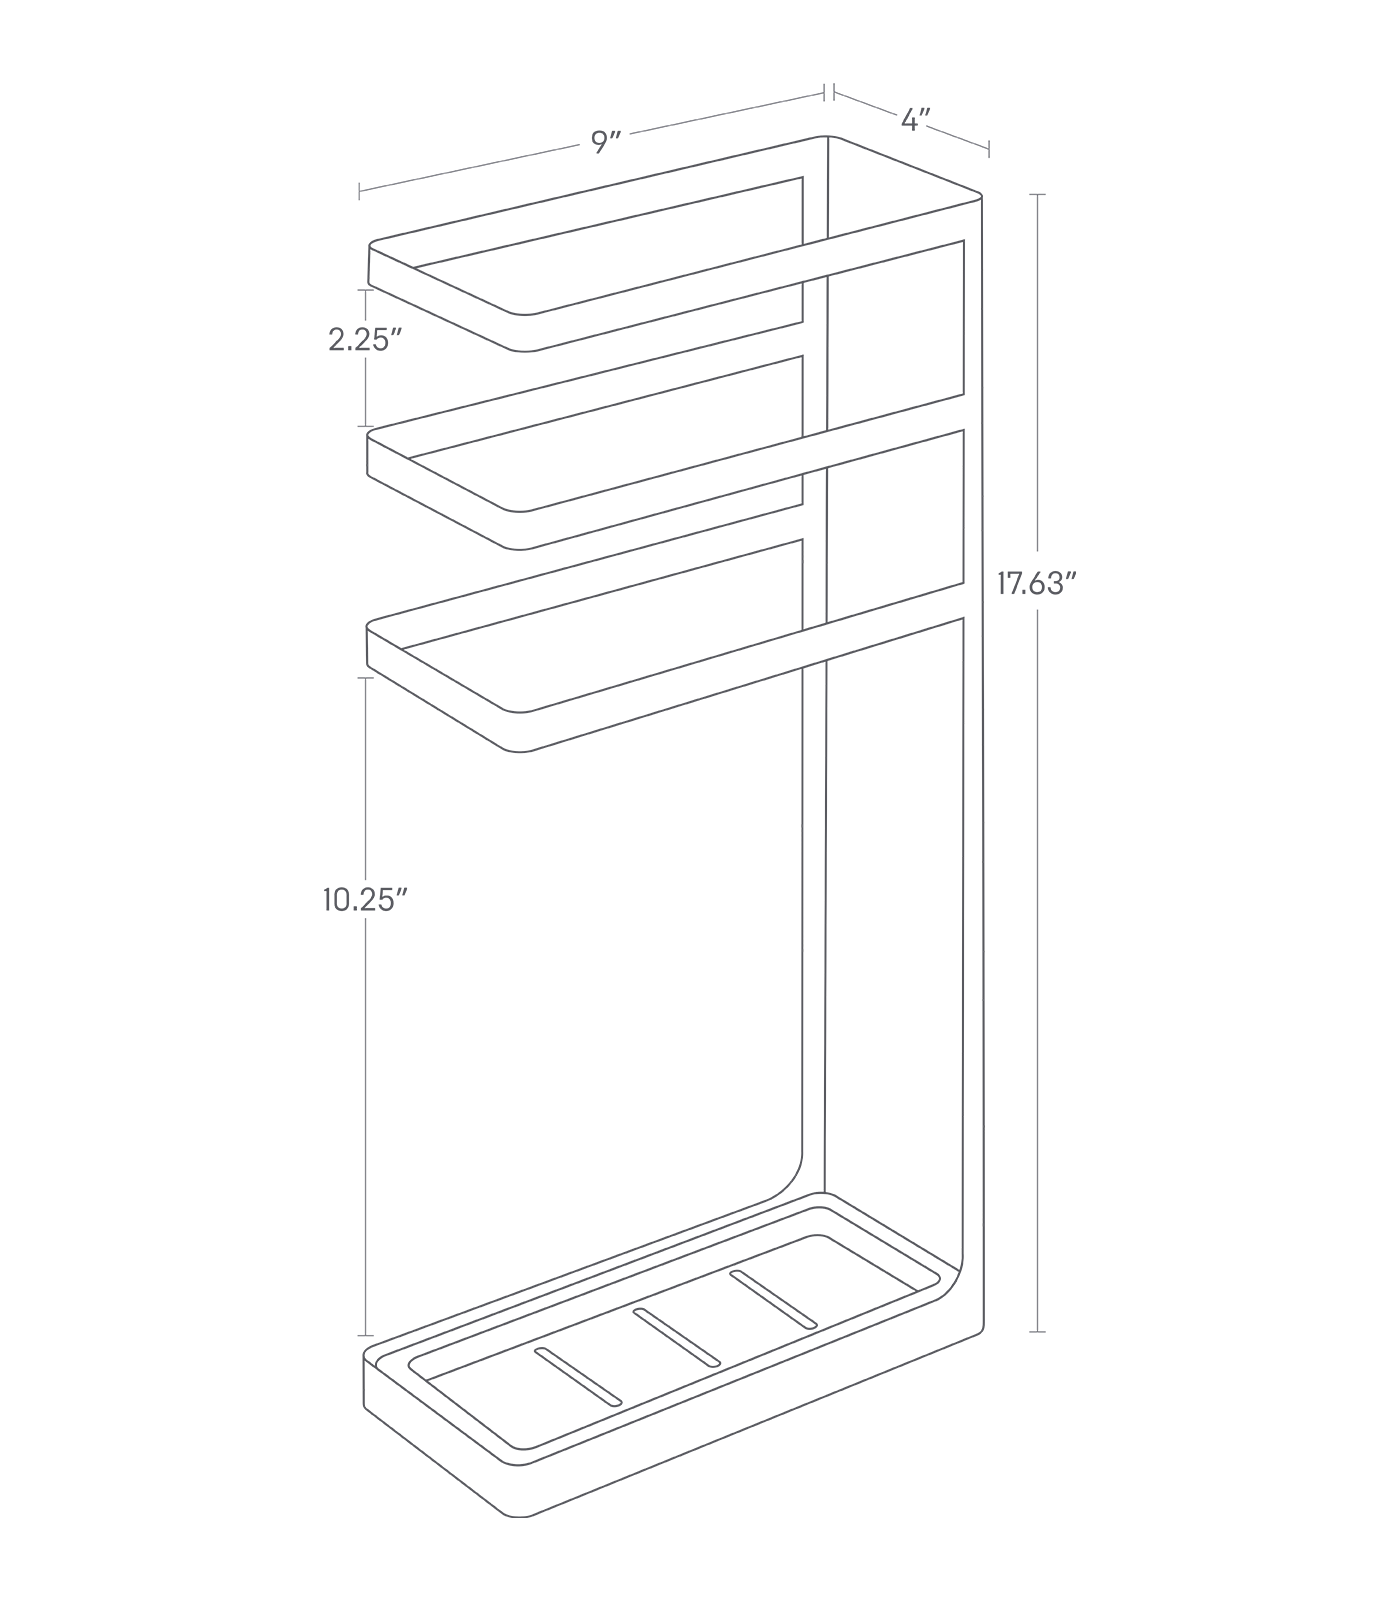 Dimension image for Umbrella Stand on a white background including dimensions  L 4.13 x W 9.06 x H 17.72 inches